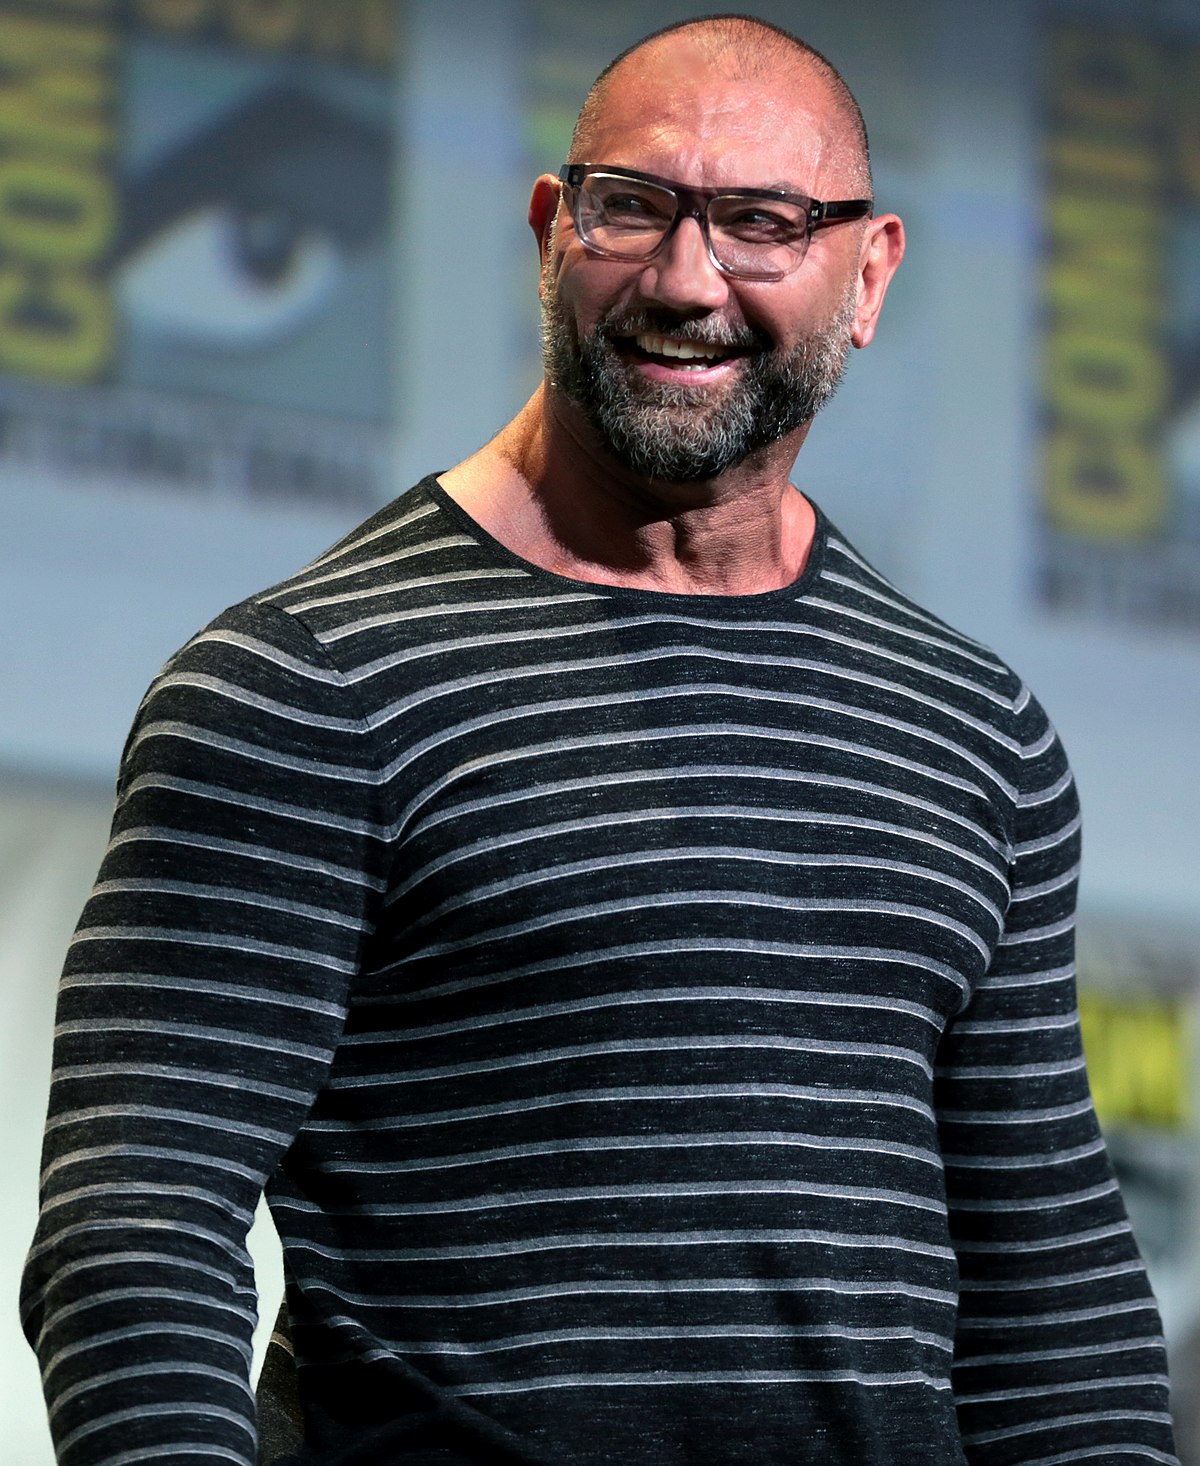 Lionsgate to Star Dave Bautista in An Upcoming Action Comedy, "The Killer’s Game"